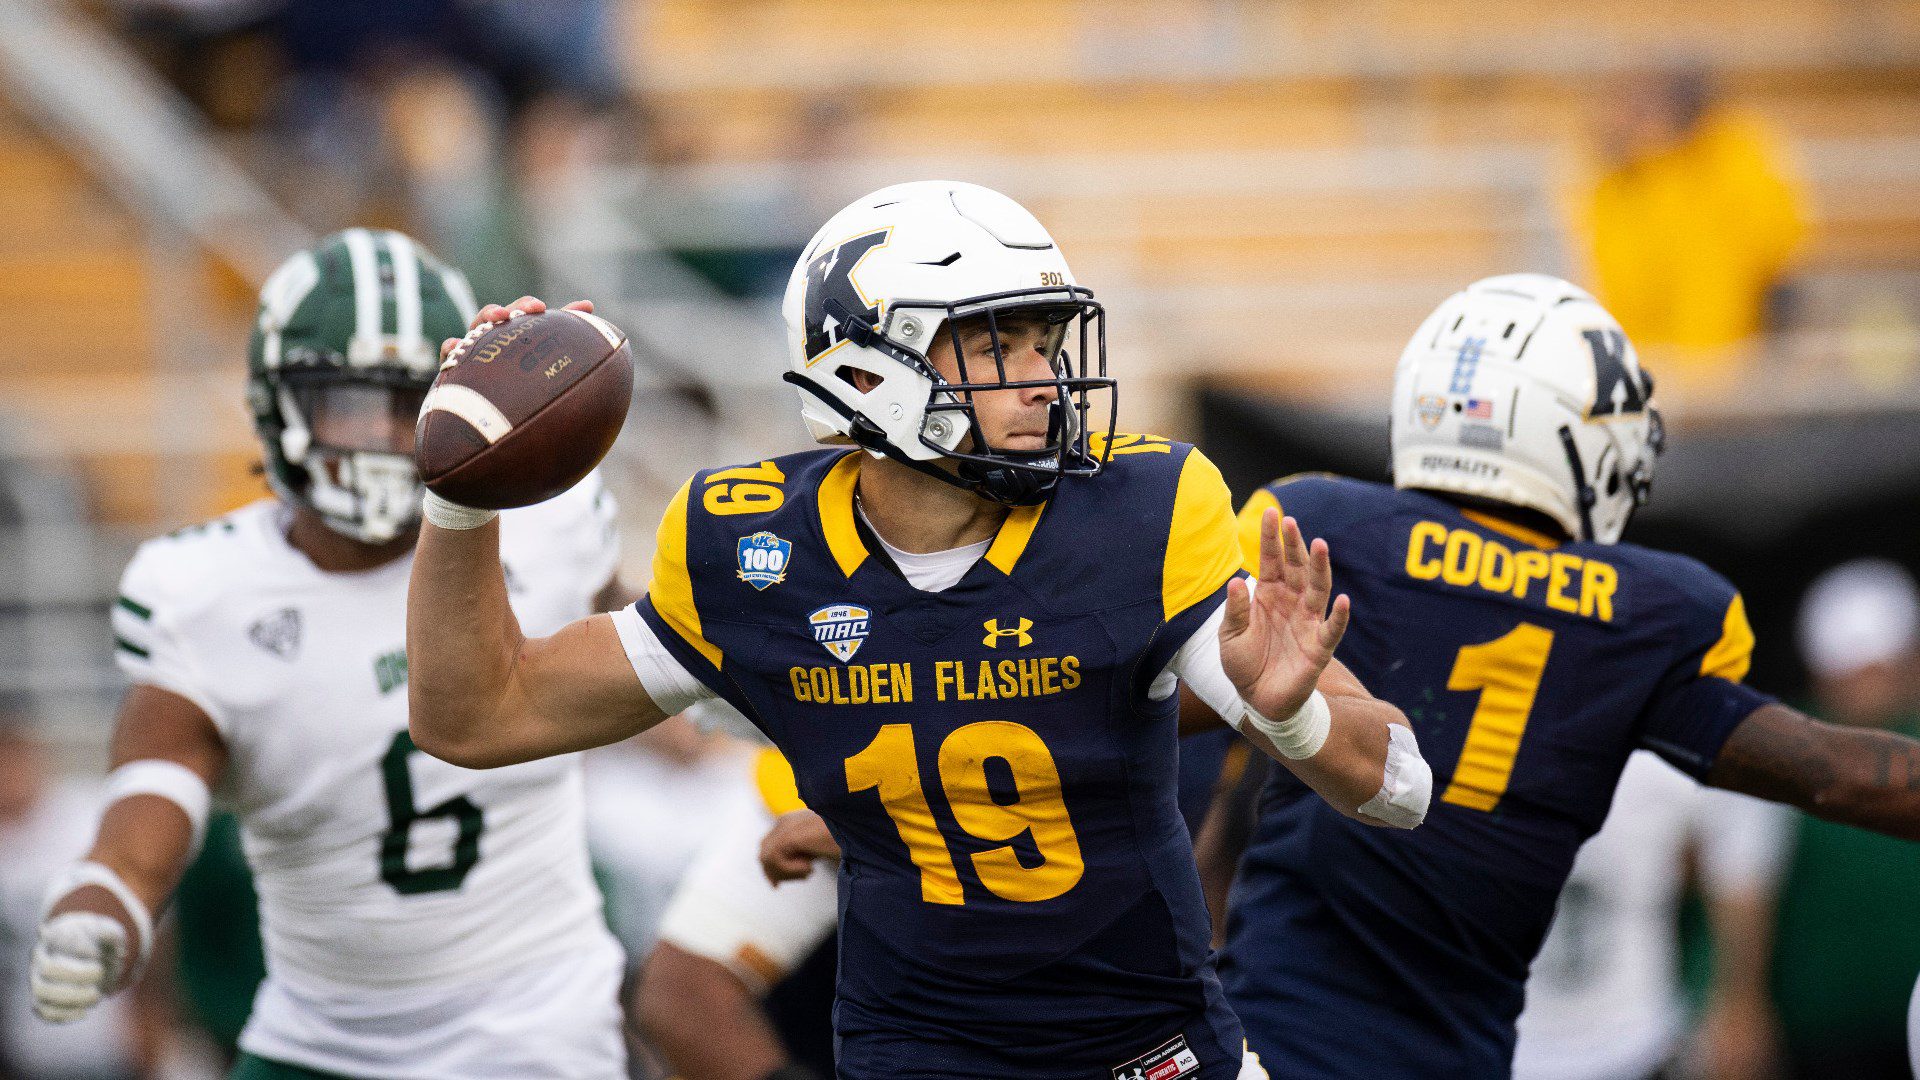 Collin Schlee is a recent transfer QB from Kent State who will be playing for UCLA this fall. Hula Bowl scout Ryan Vidales breaks down Schlee as an NFL Prospect in his report.